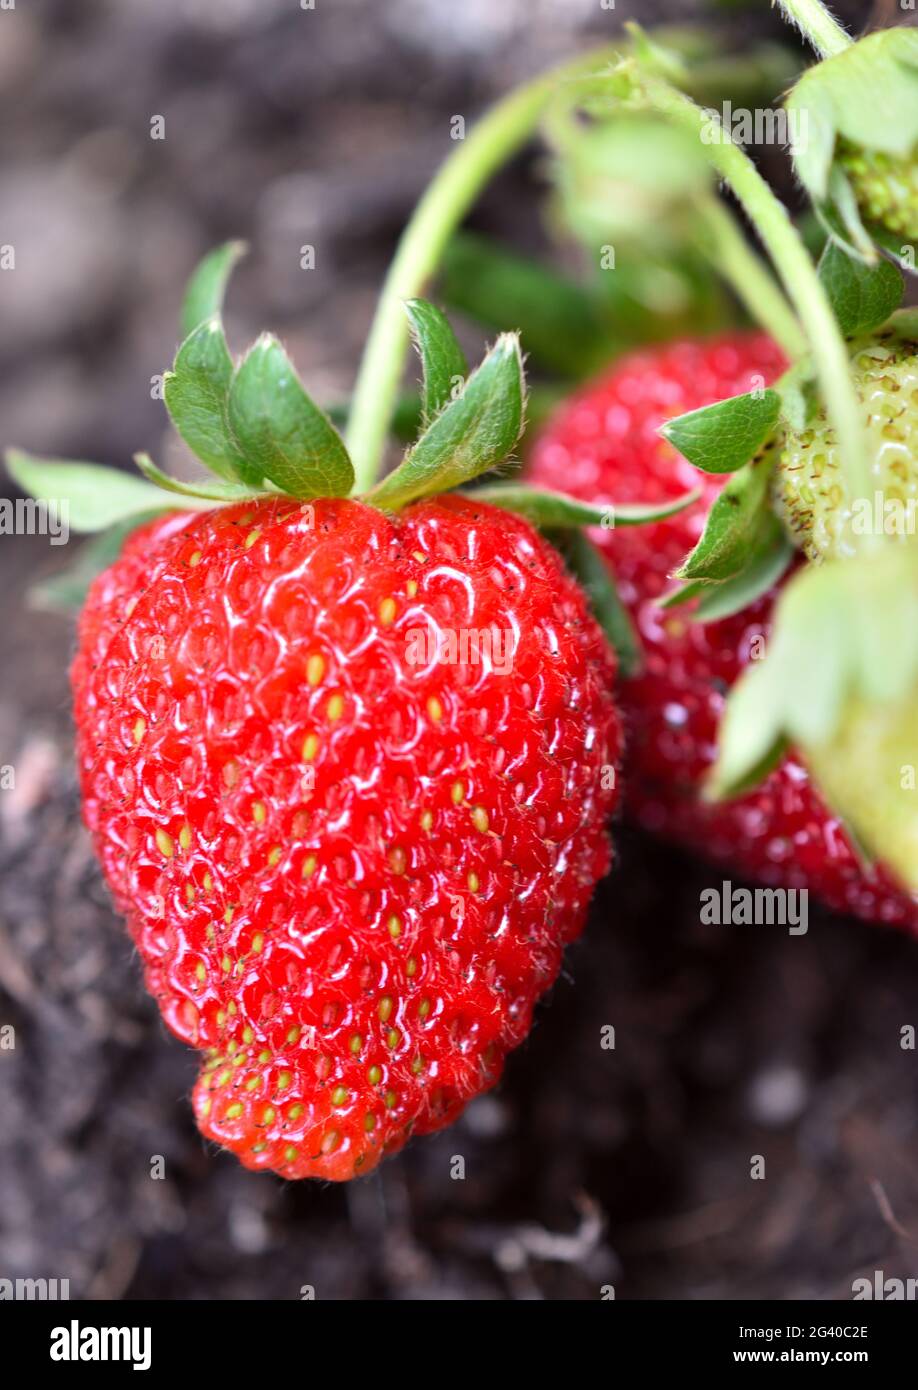 Close up image of two red, ripe 'Albion' everbearing strawberries (Fragaria x ananassa) with stem attached on a brown background. Stock Photo